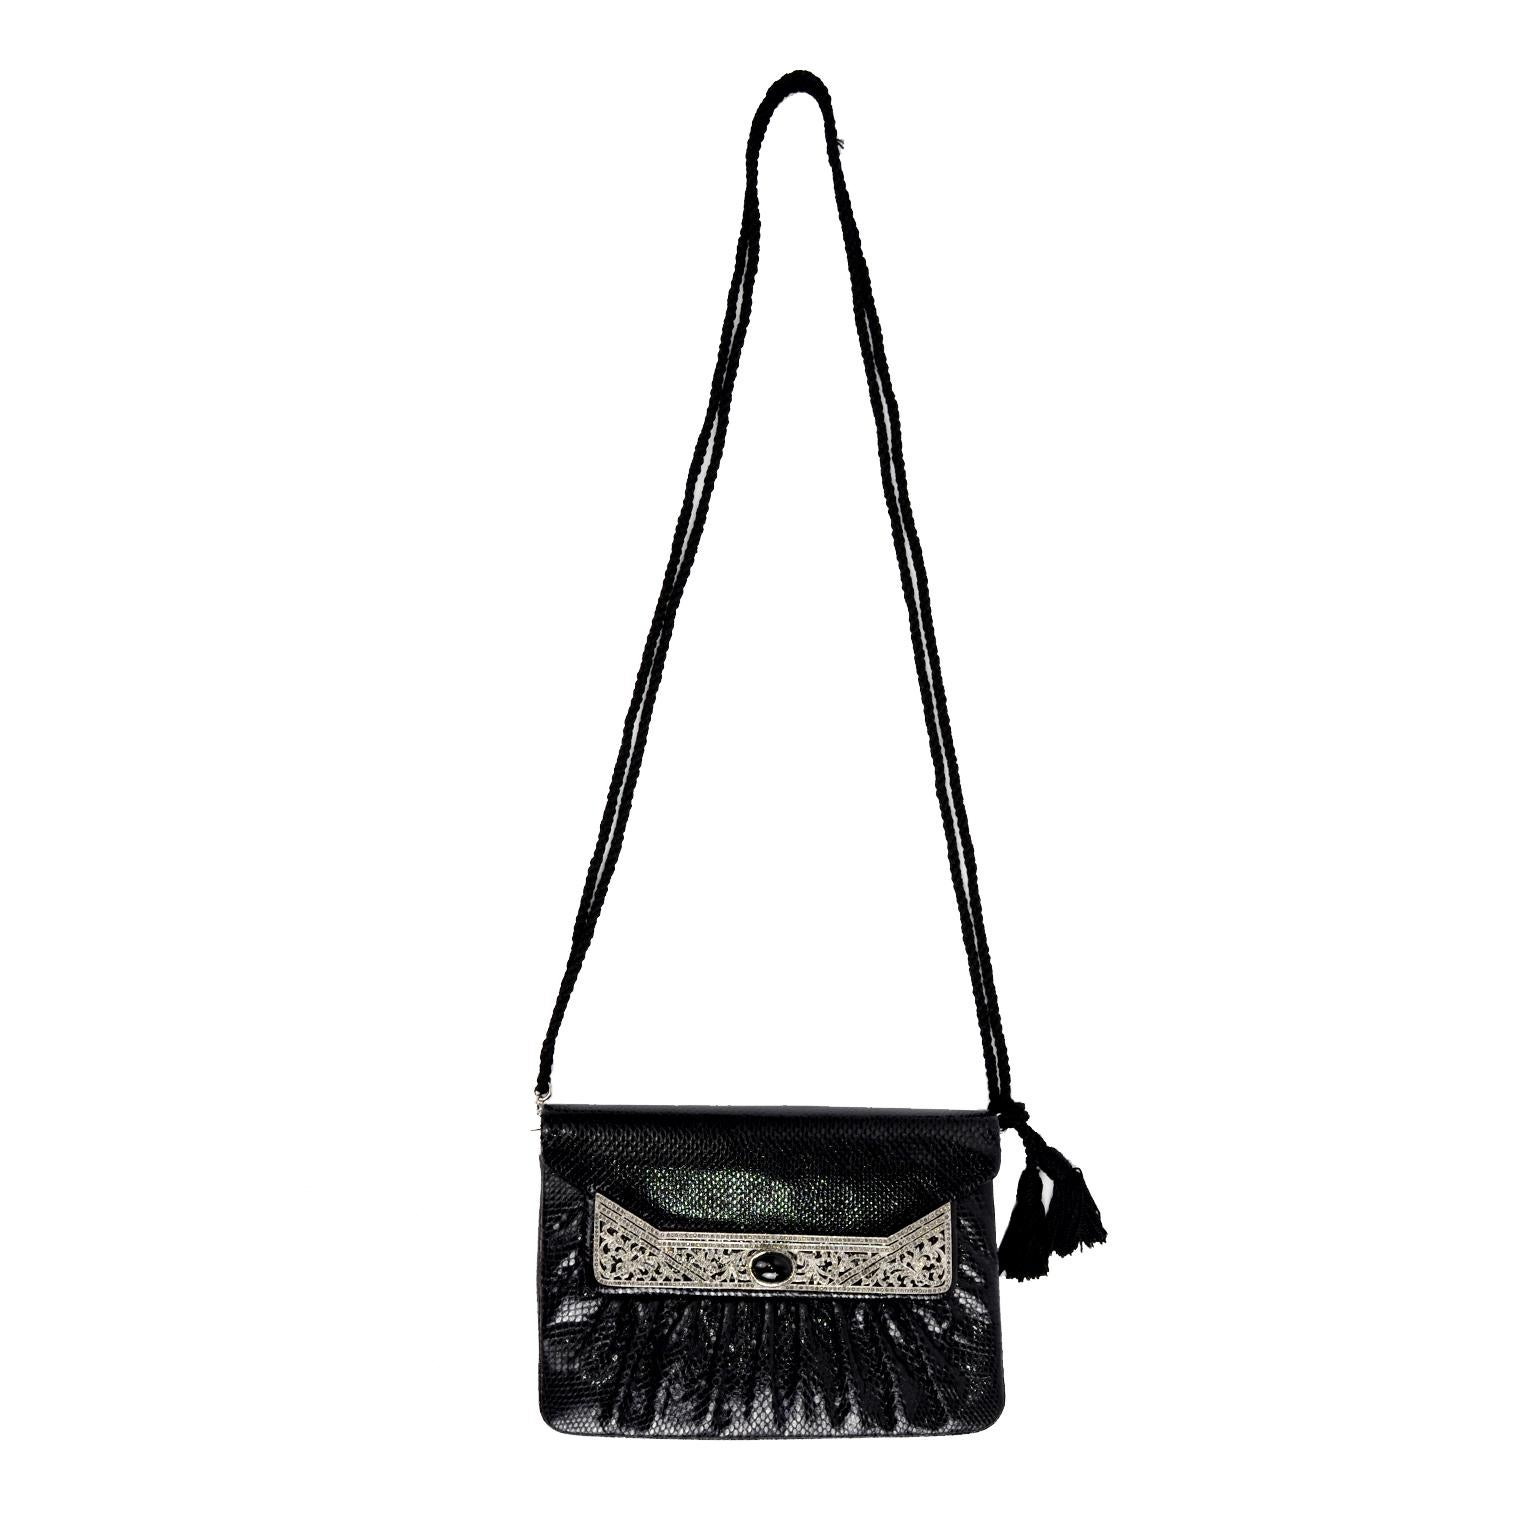 This is a lovely deadstock vintage Judith Leiber handbag with a beautiful marcasite front embellishment with a center black cabochon. The bag has an inside zipper, open side pocket, removable black rope shoulder strap with tassels, to convert it